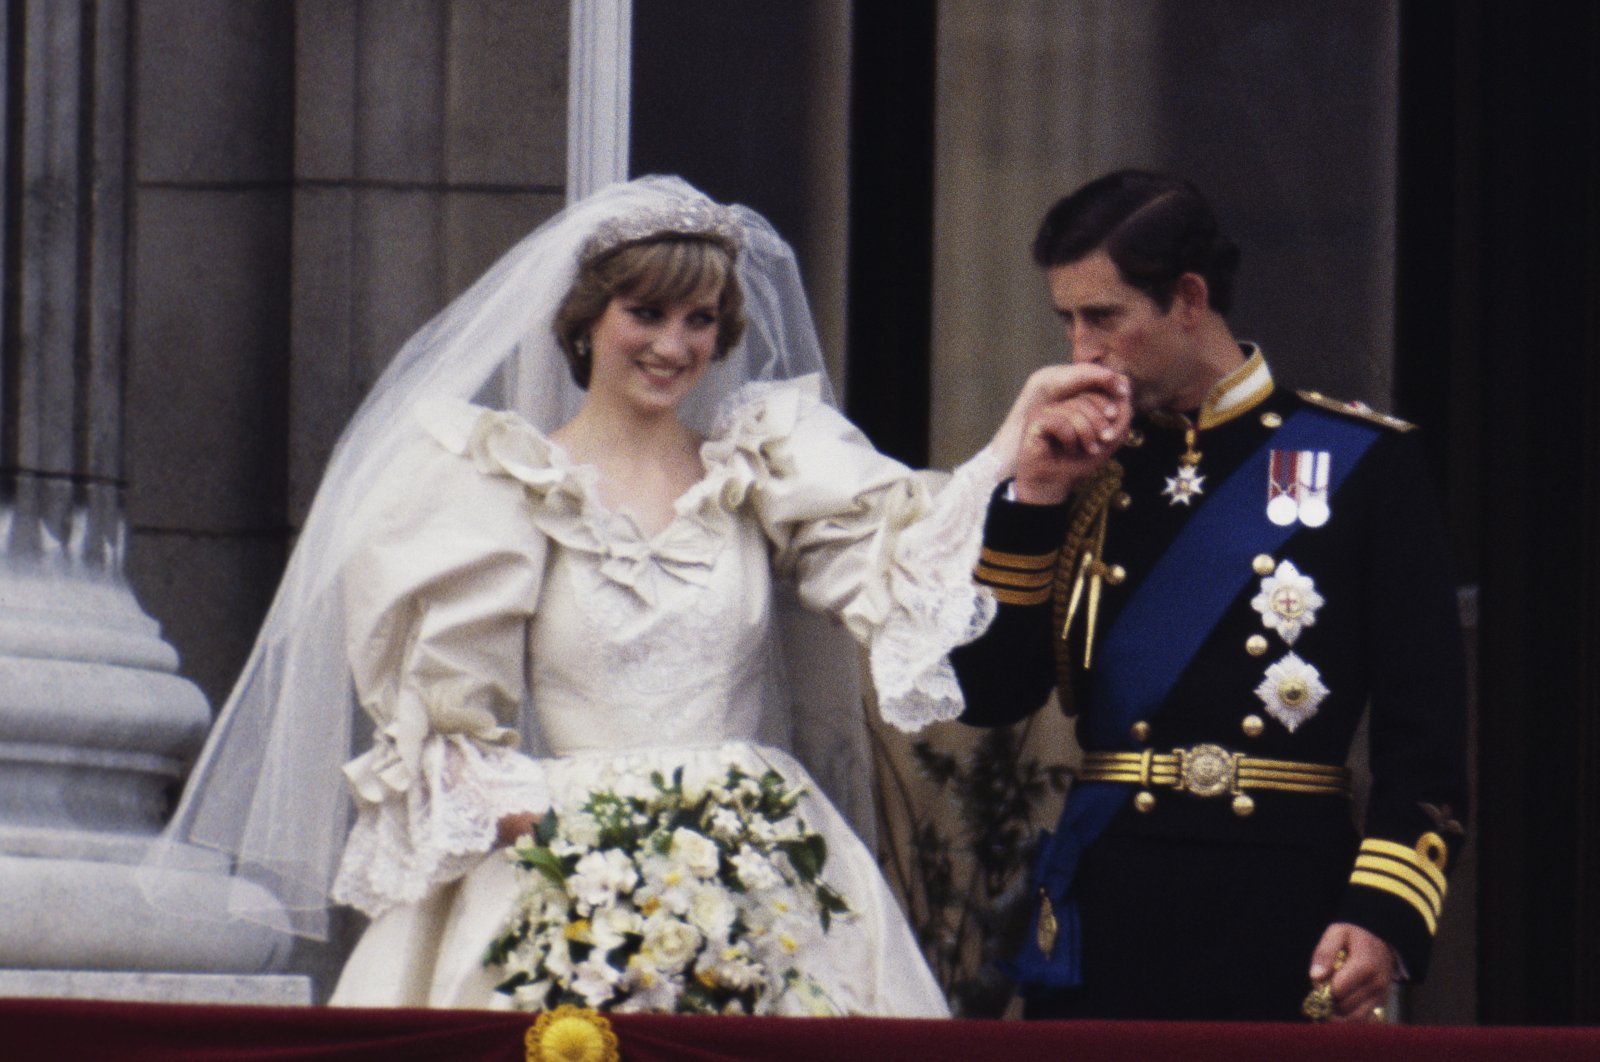 The Prince and Princess of Wales on the balcony of Buckingham Palace on their wedding day, as Diana wears a wedding dress by David and Elizabeth Emmanuel and the Spencer family tiara, London, U.K., July 29, 1981. (Getty Images Photo)